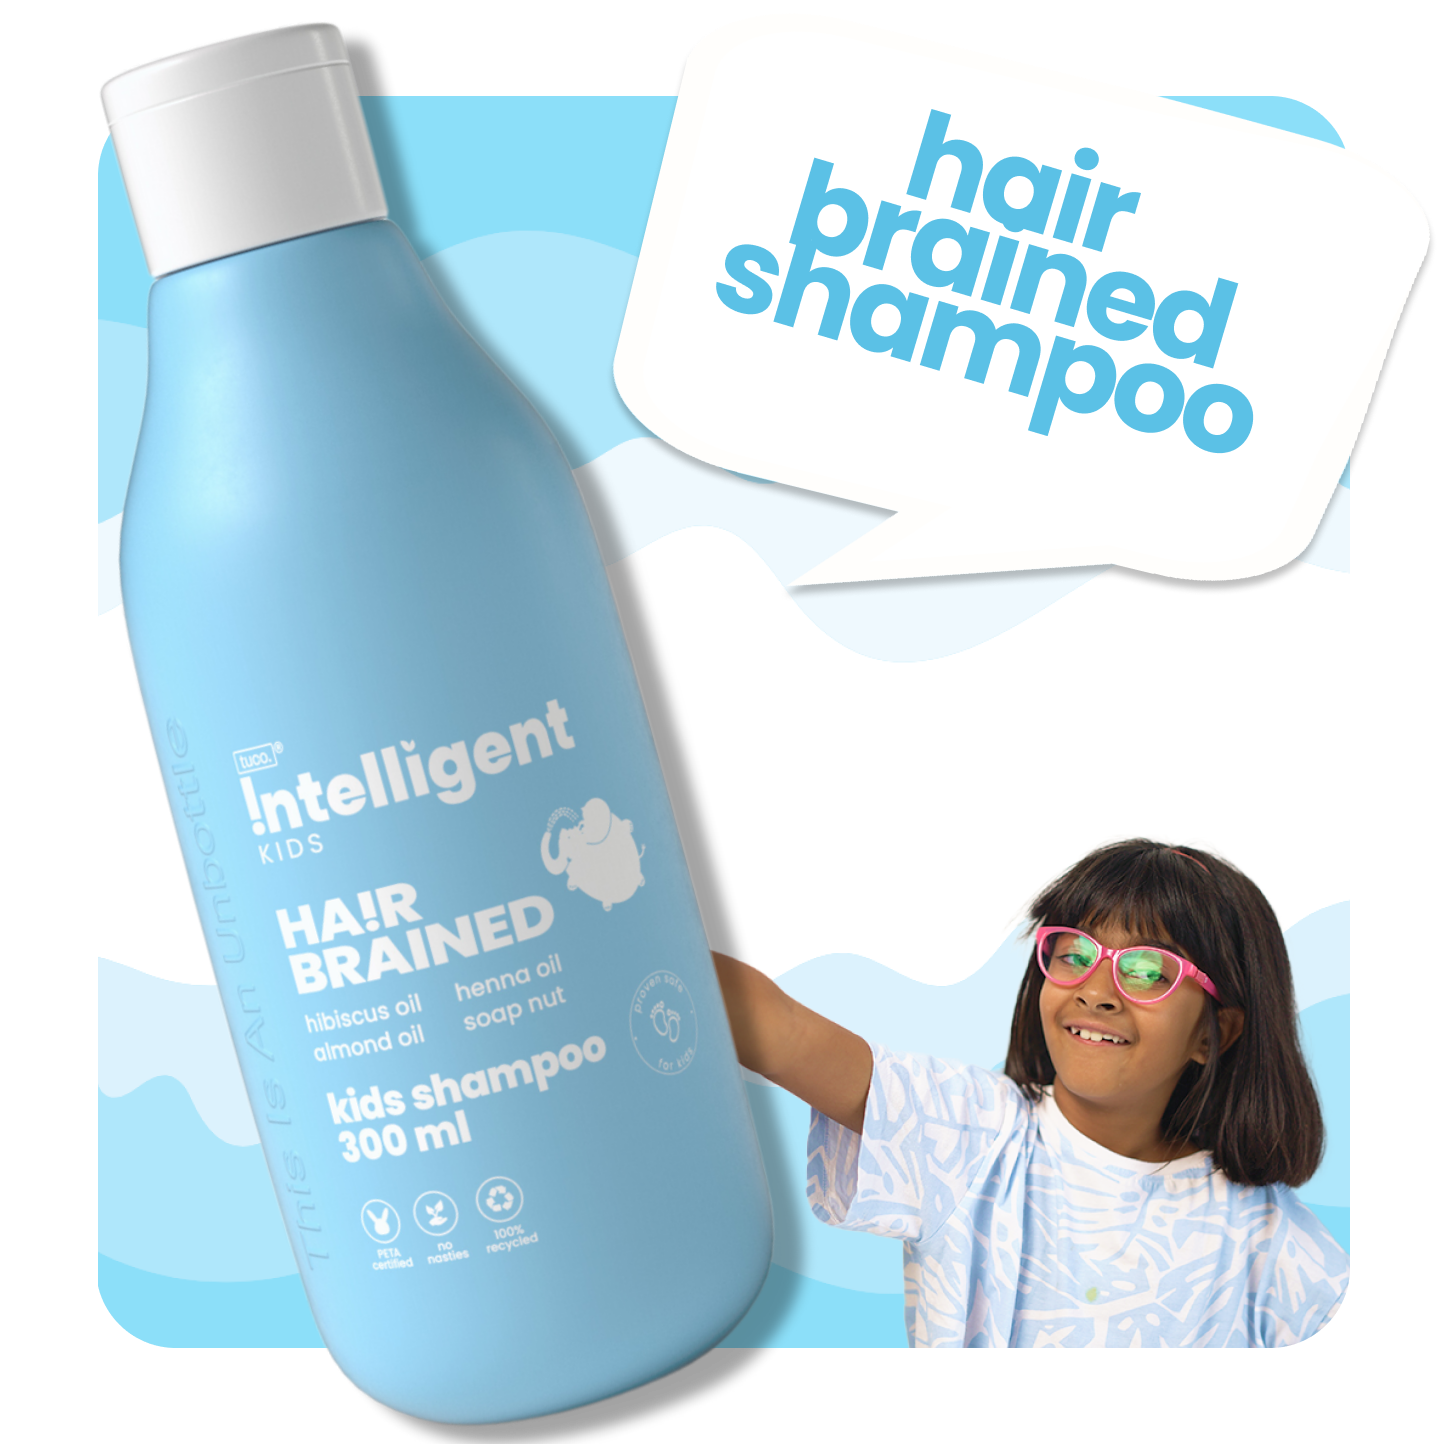 A gentle and nourishing shampoo specially formulated for kids. The shampoo is enriched with the natural goodness of hibiscus oil and almond oil, providing a mild and effective cleansing experience. The combination of these ingredients helps to promote healthy and shiny hair, while also being gentle on the delicate scalp of children.